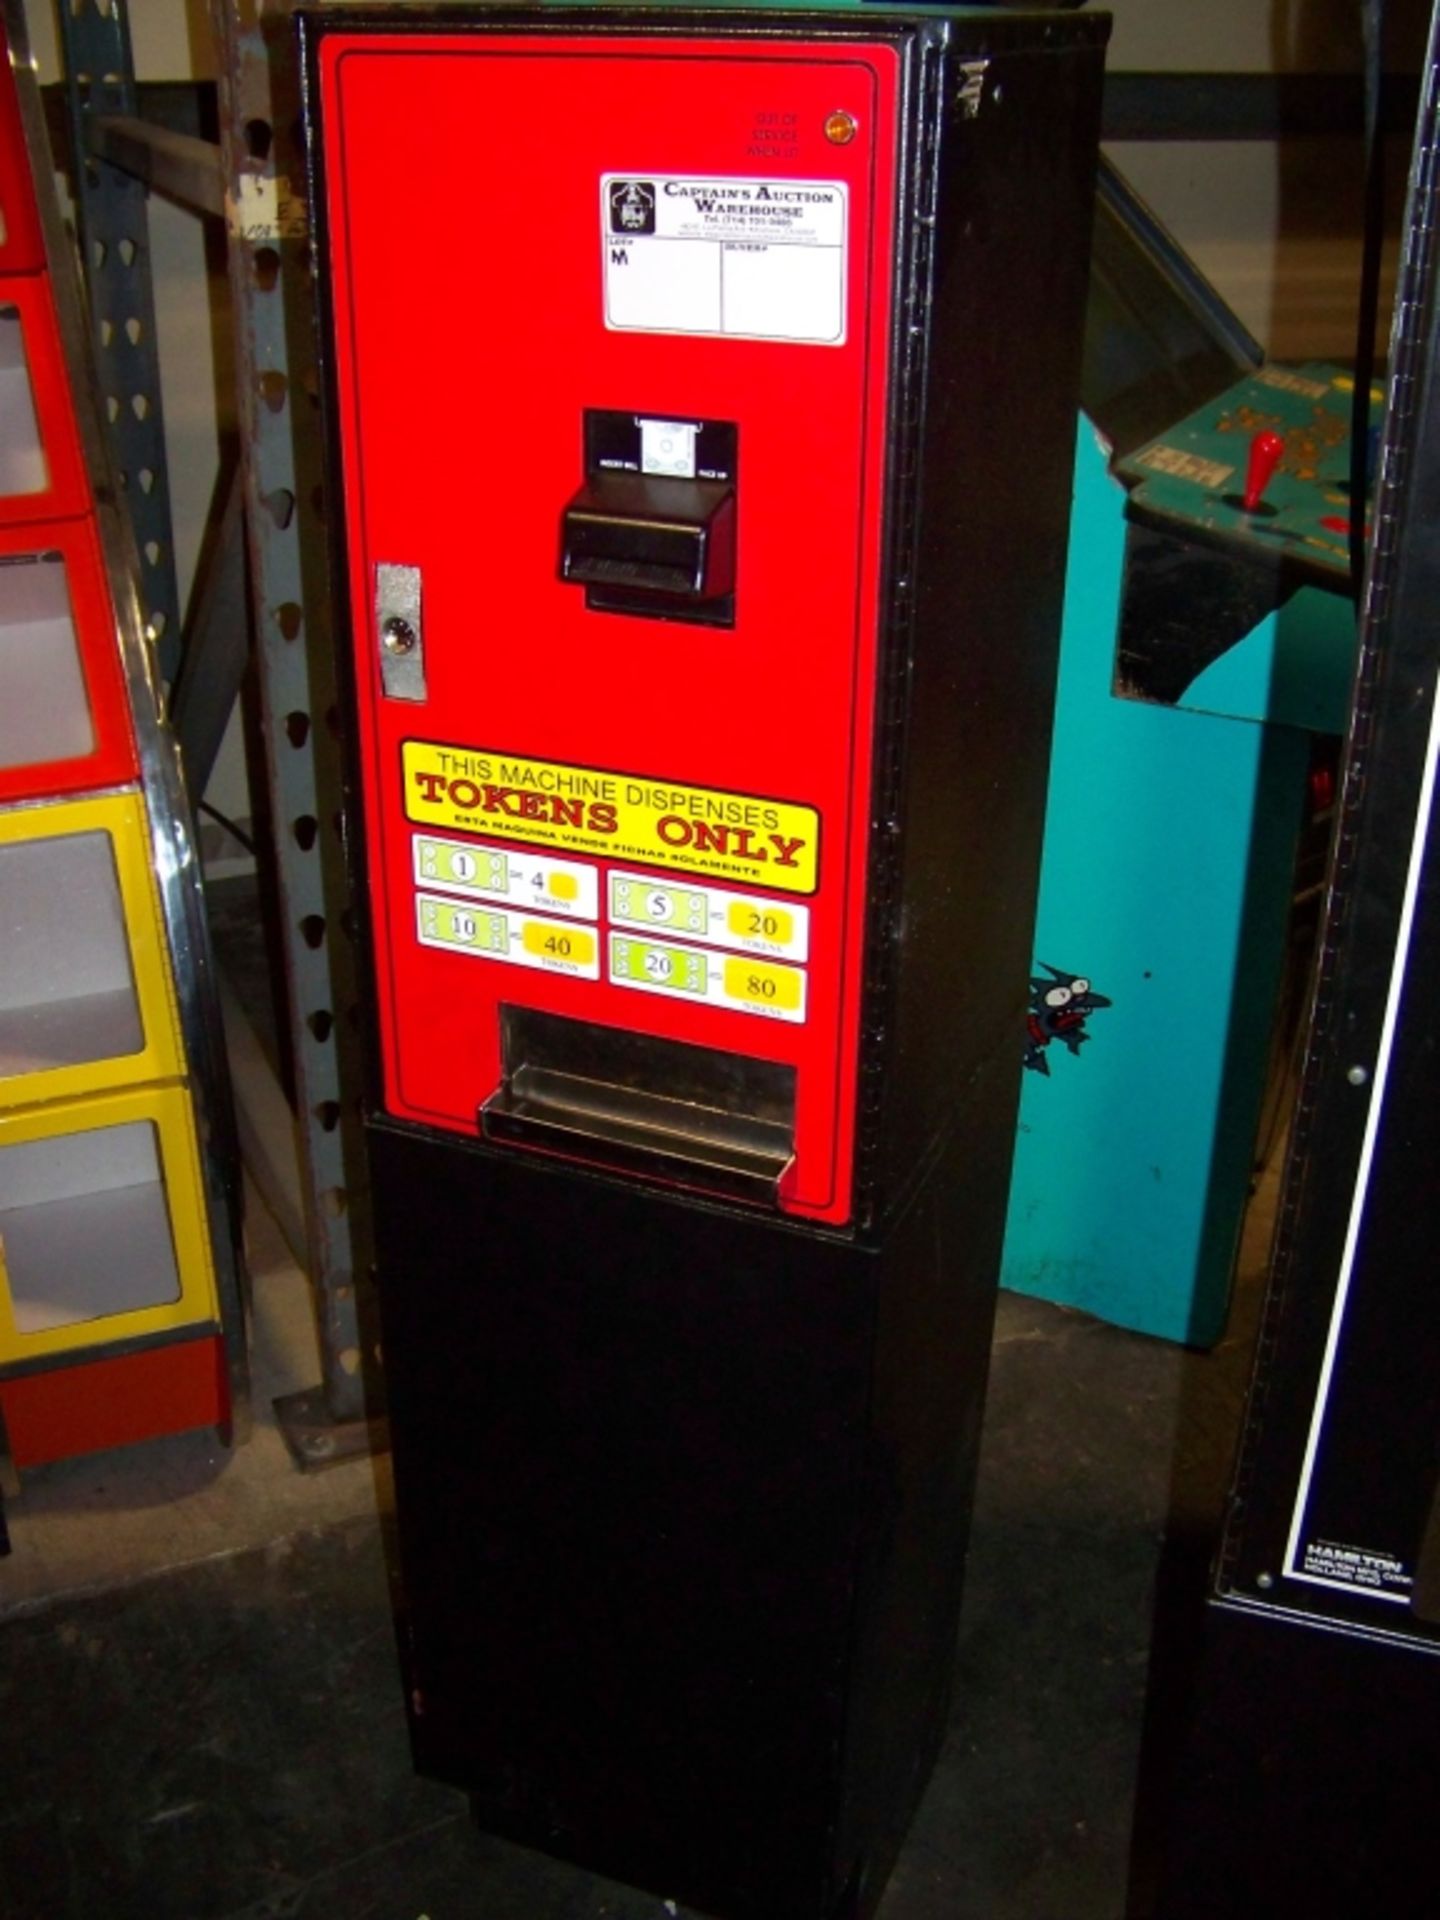 STANDARD EC200 DOLLAR BILL CHANGER MACHINE RED Item is in used condition. Evidence of wear and